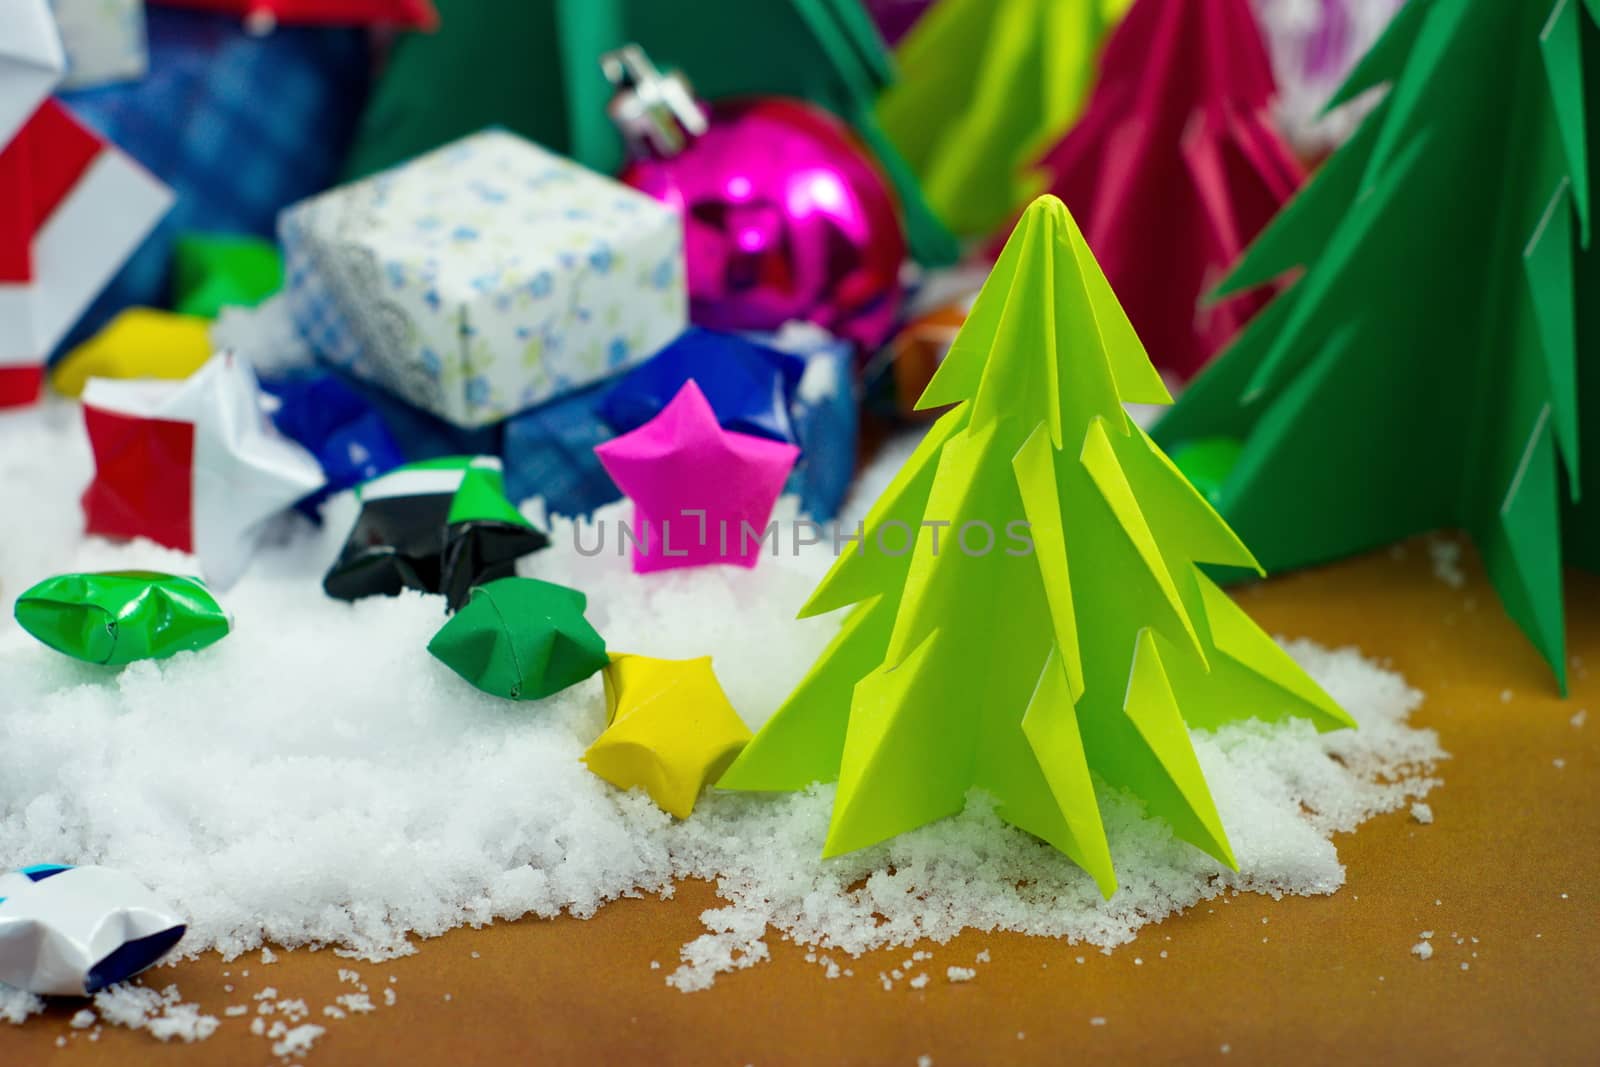 Christmas tree, Origami on snow with small star paper